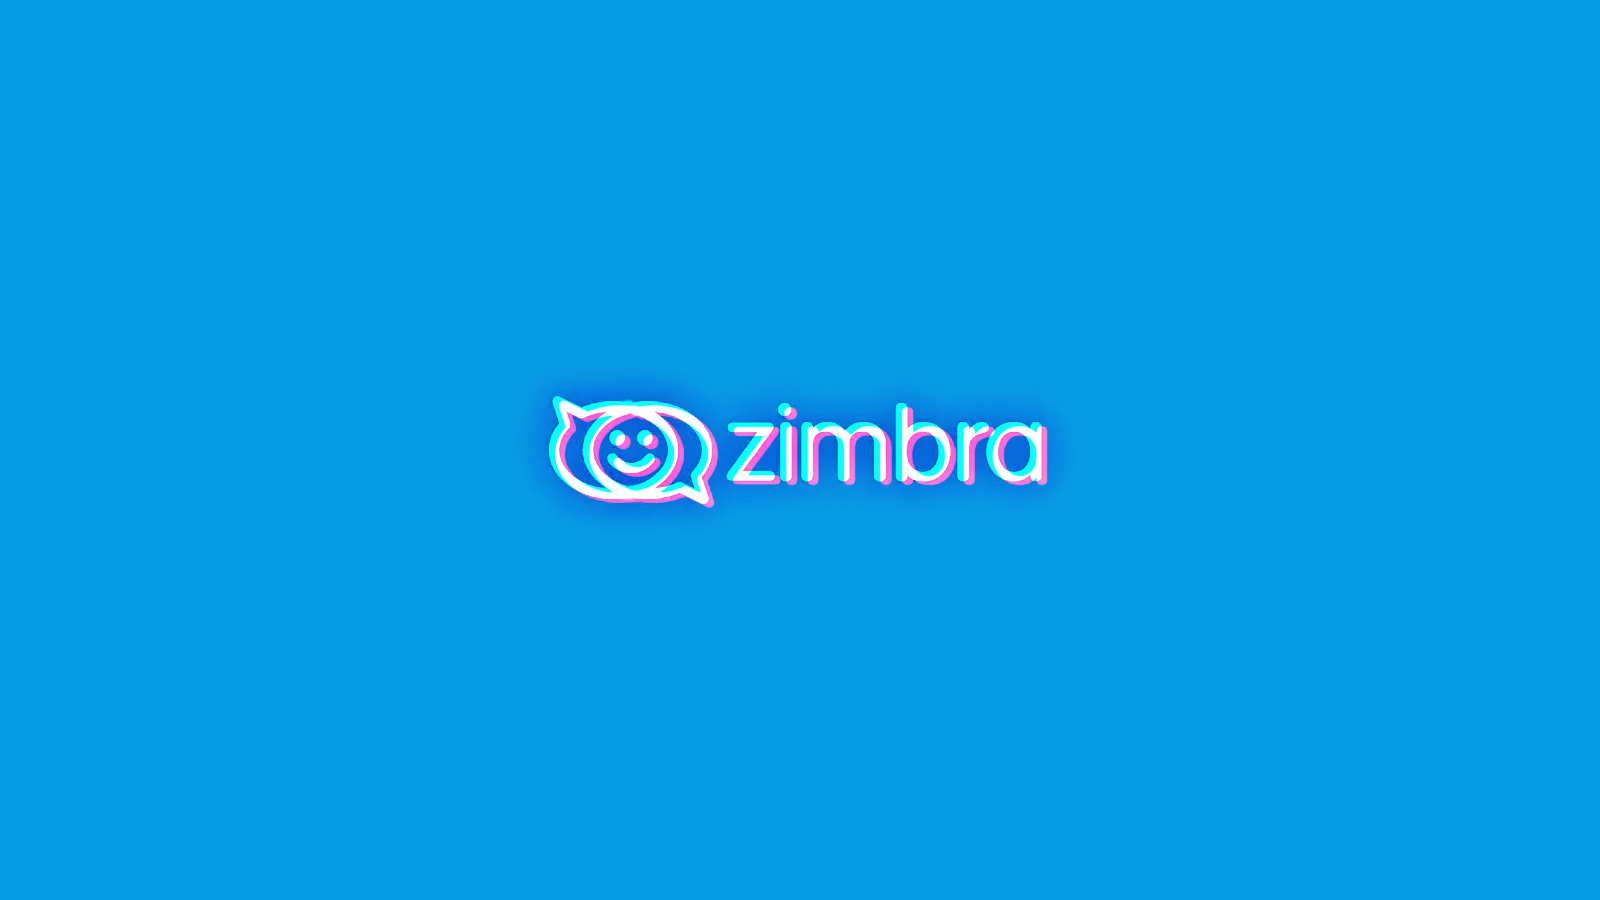 Zimbra auth bypass computer virus exploited to breach over 1,000 servers